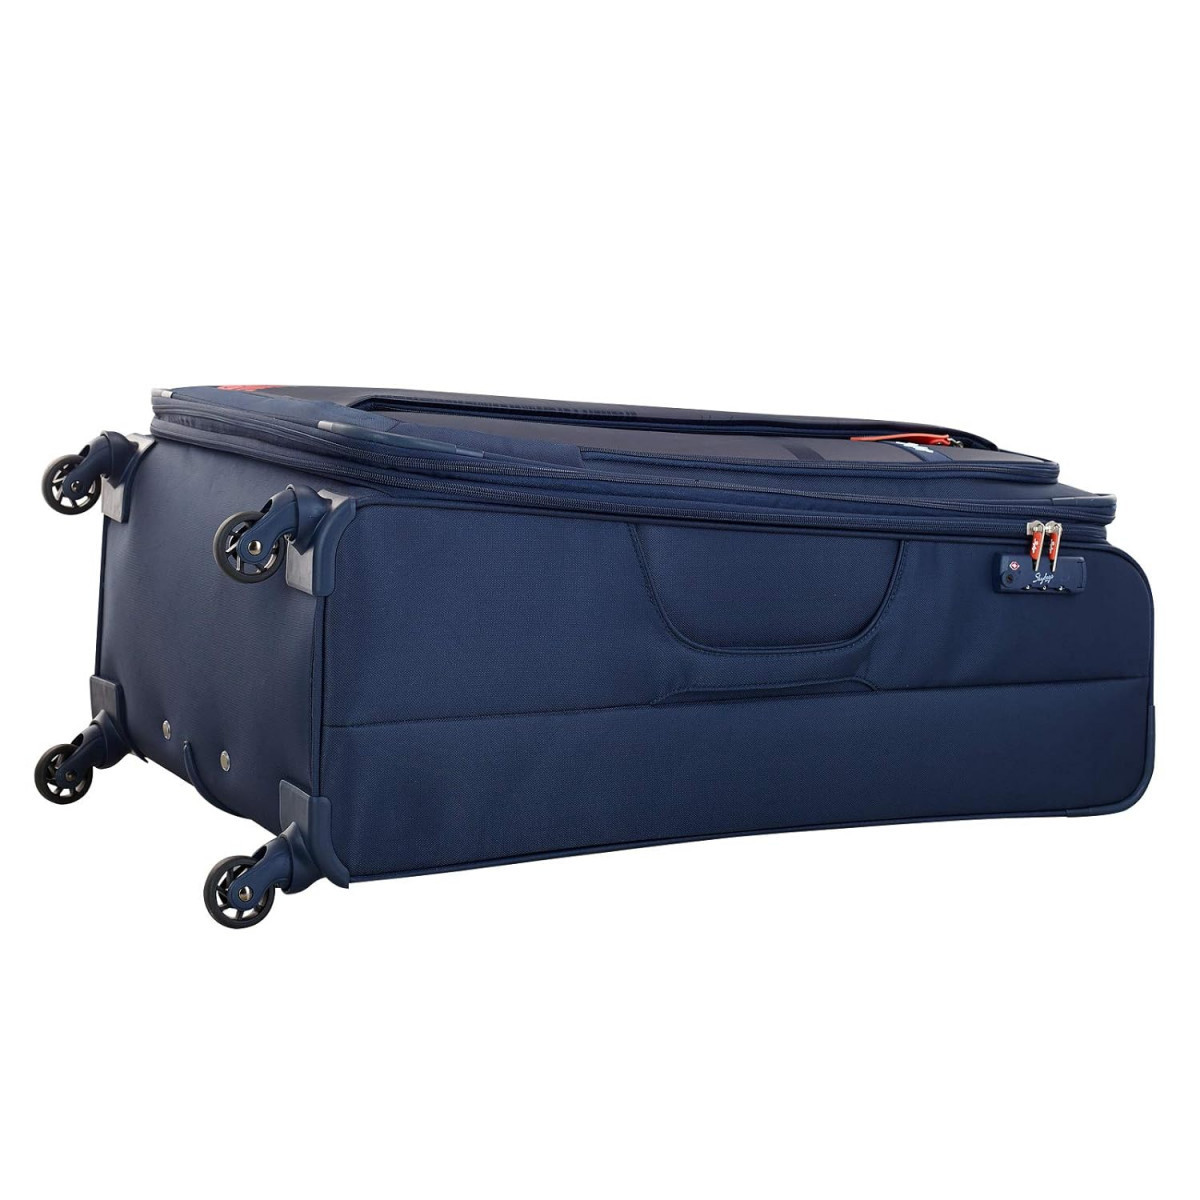 Skybags Polyester 805 Cms Navy Blue Softsided Check-in Luggage Stairw81Nbl